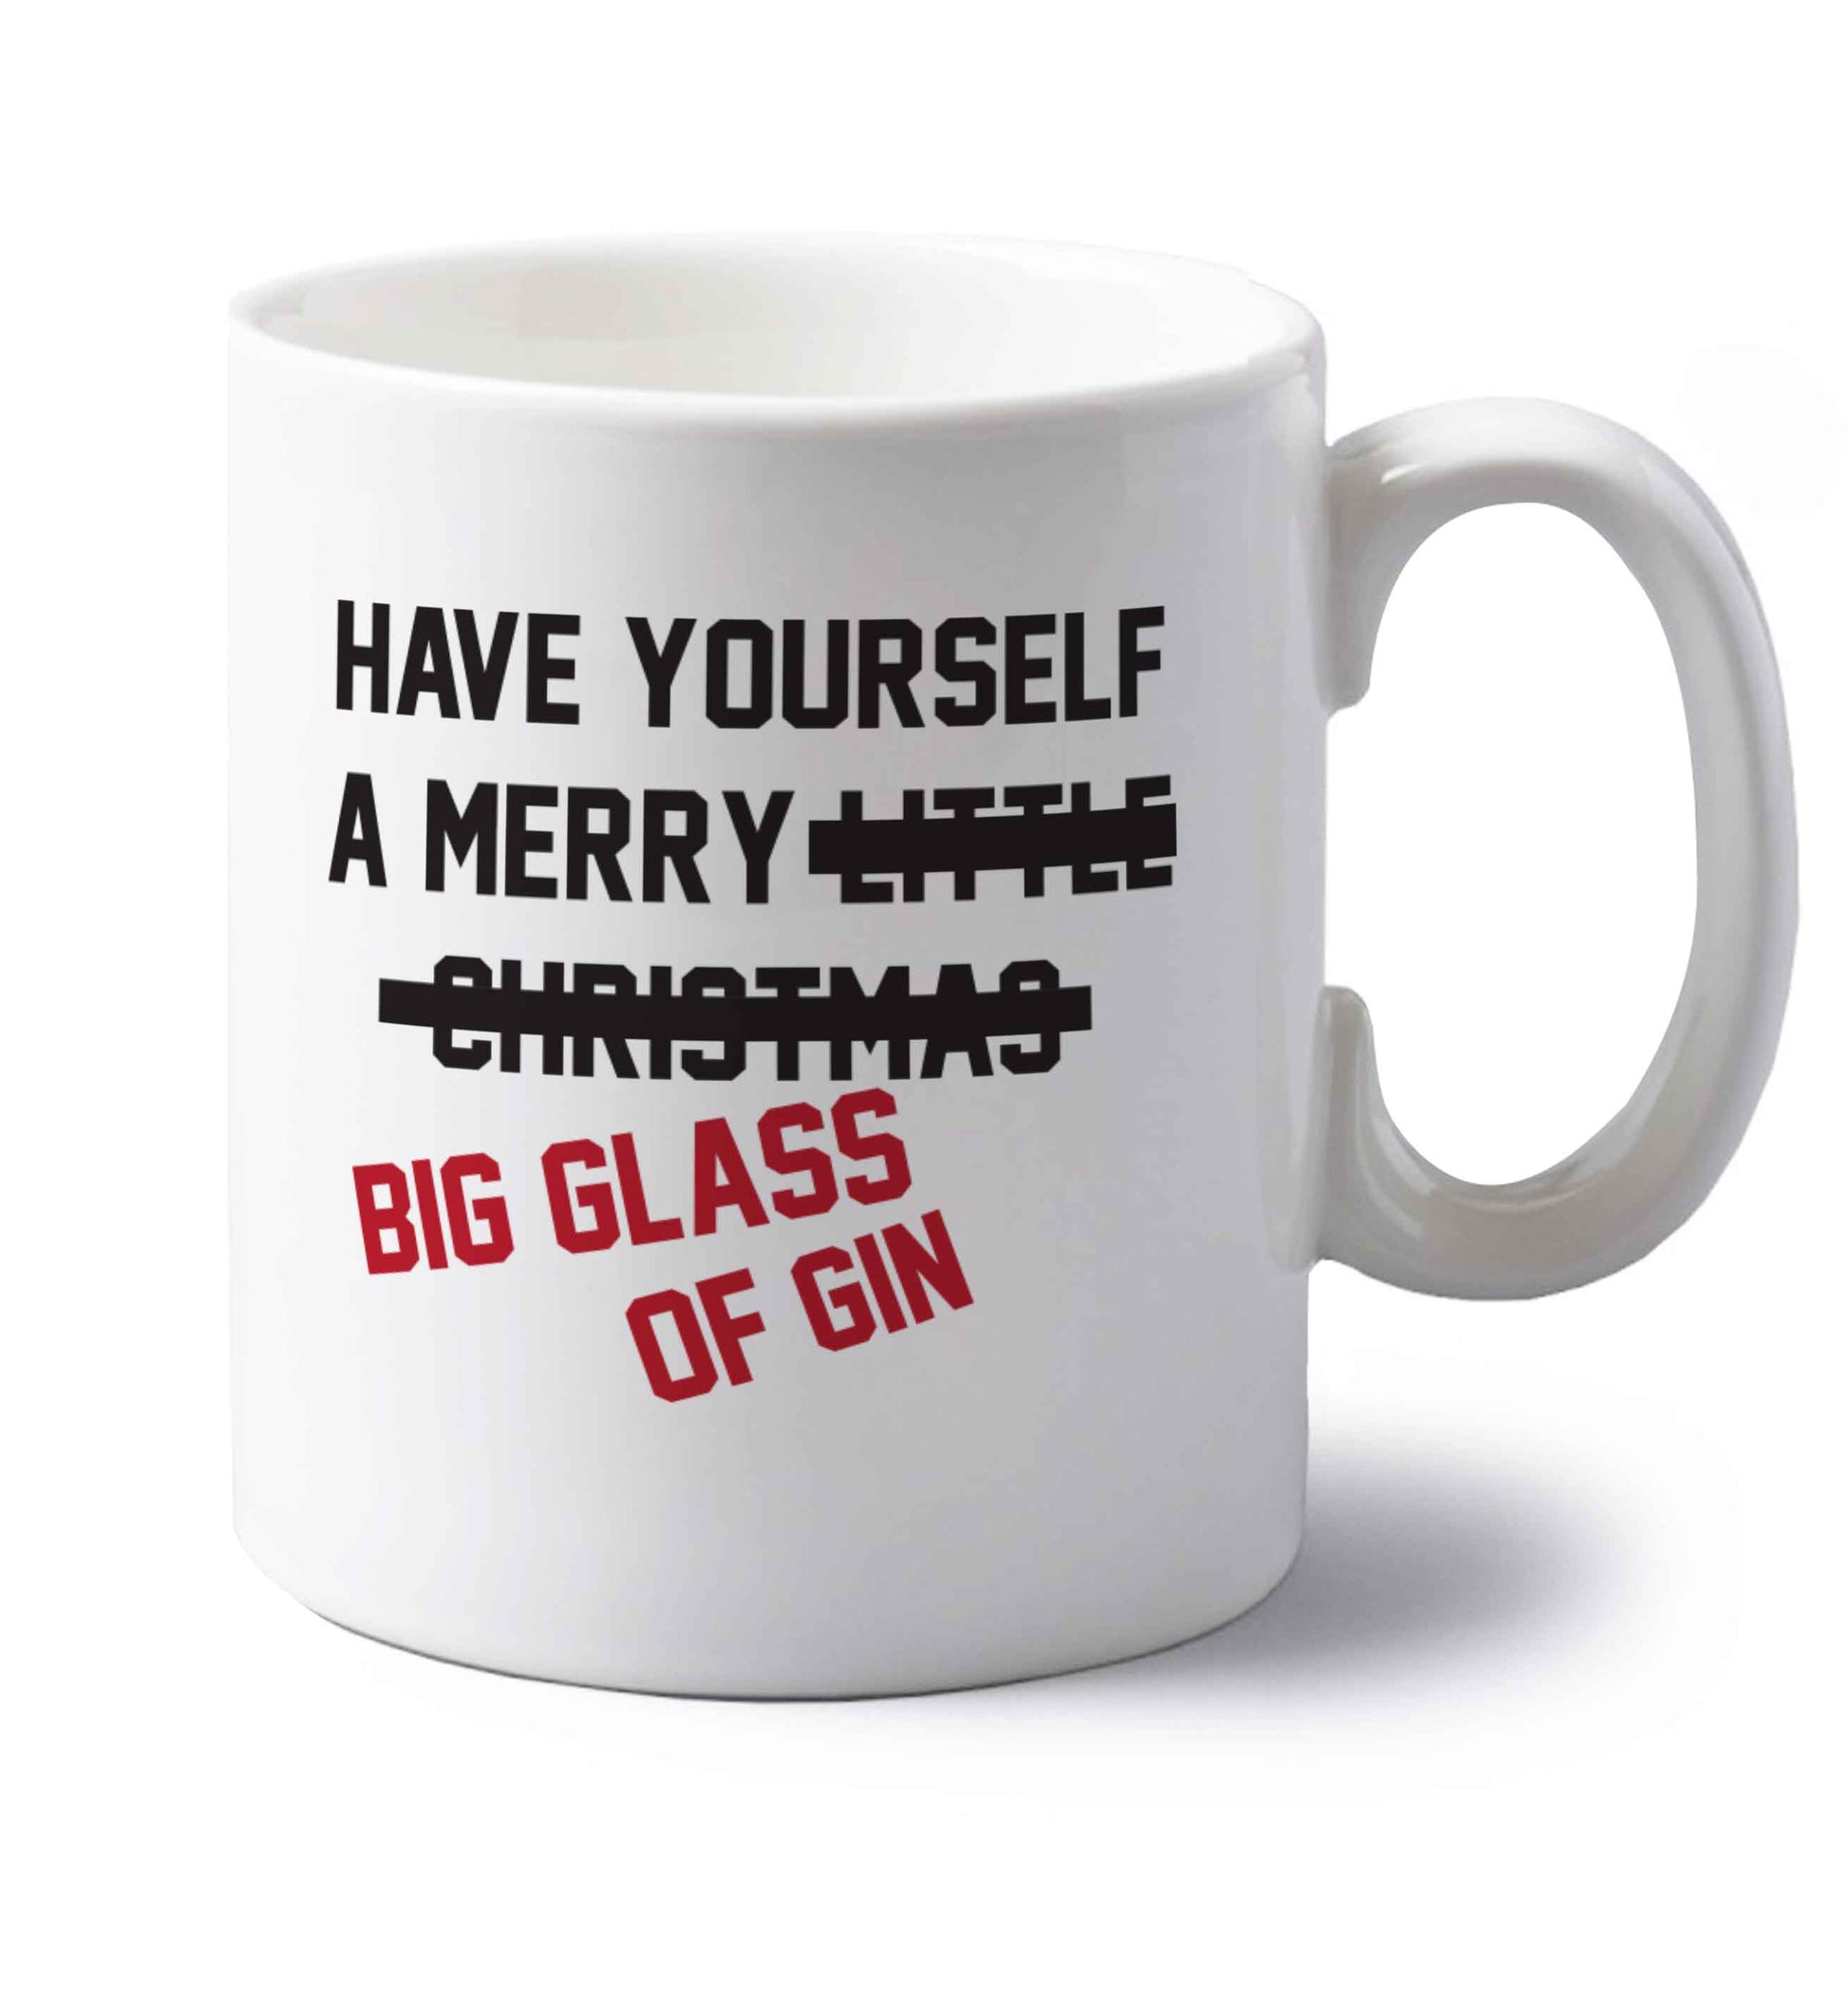 Have yourself a merry big glass of gin left handed white ceramic mug 